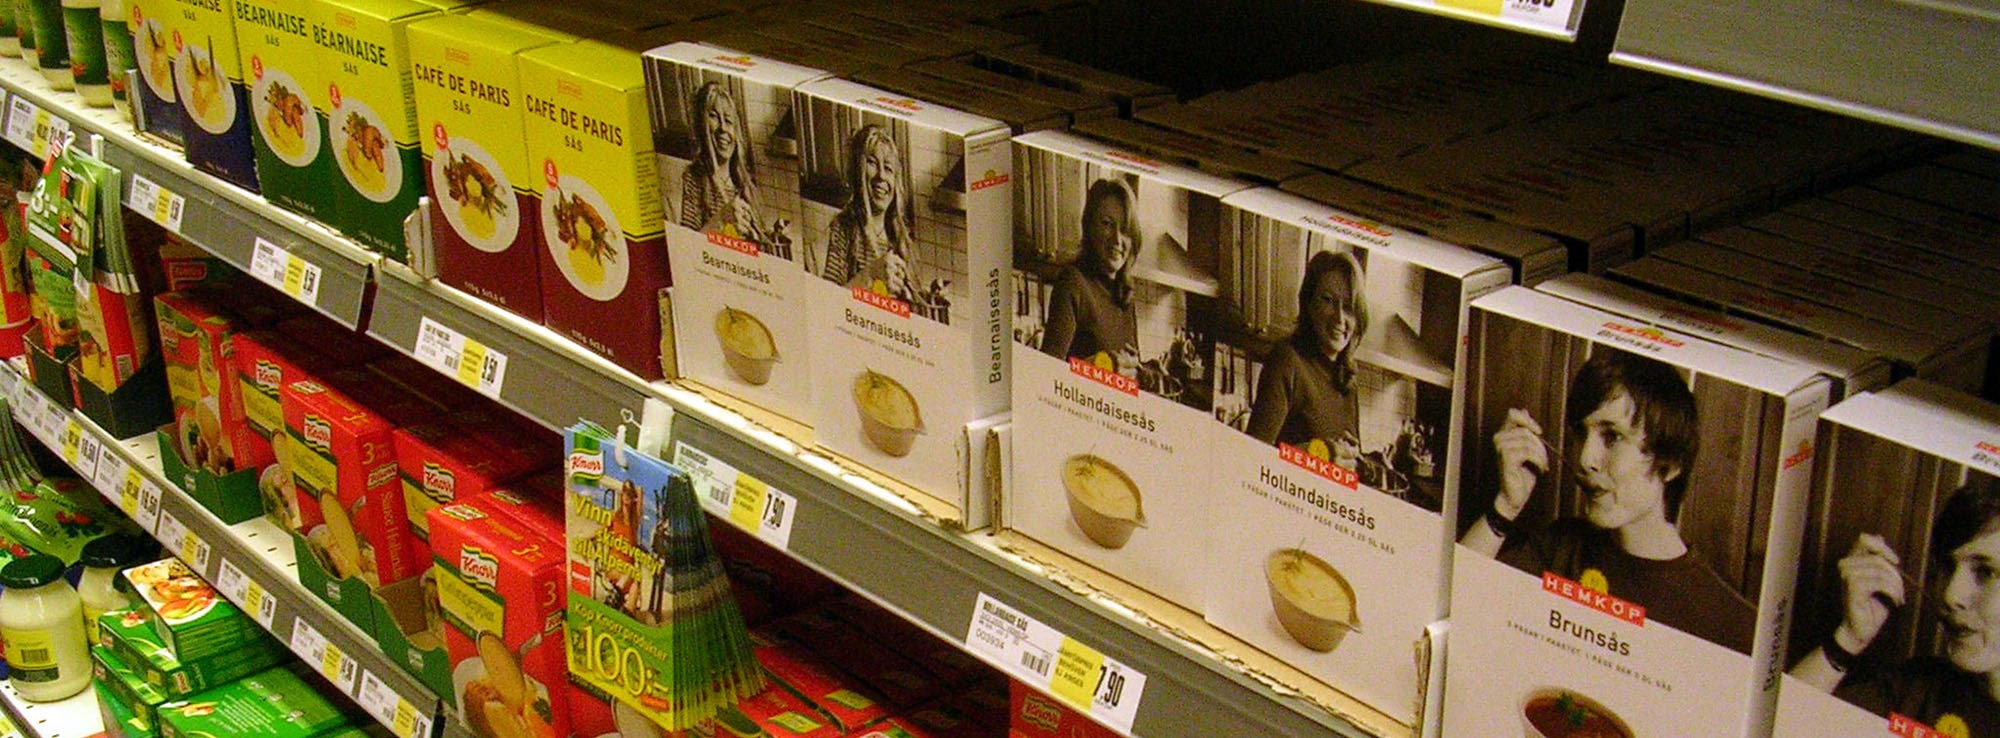  A shelf in a Swedish grocery store showing both private label and international brands. Photo: Väsk/Wikimedia Commons/GNU Free Documentation License 1.2 